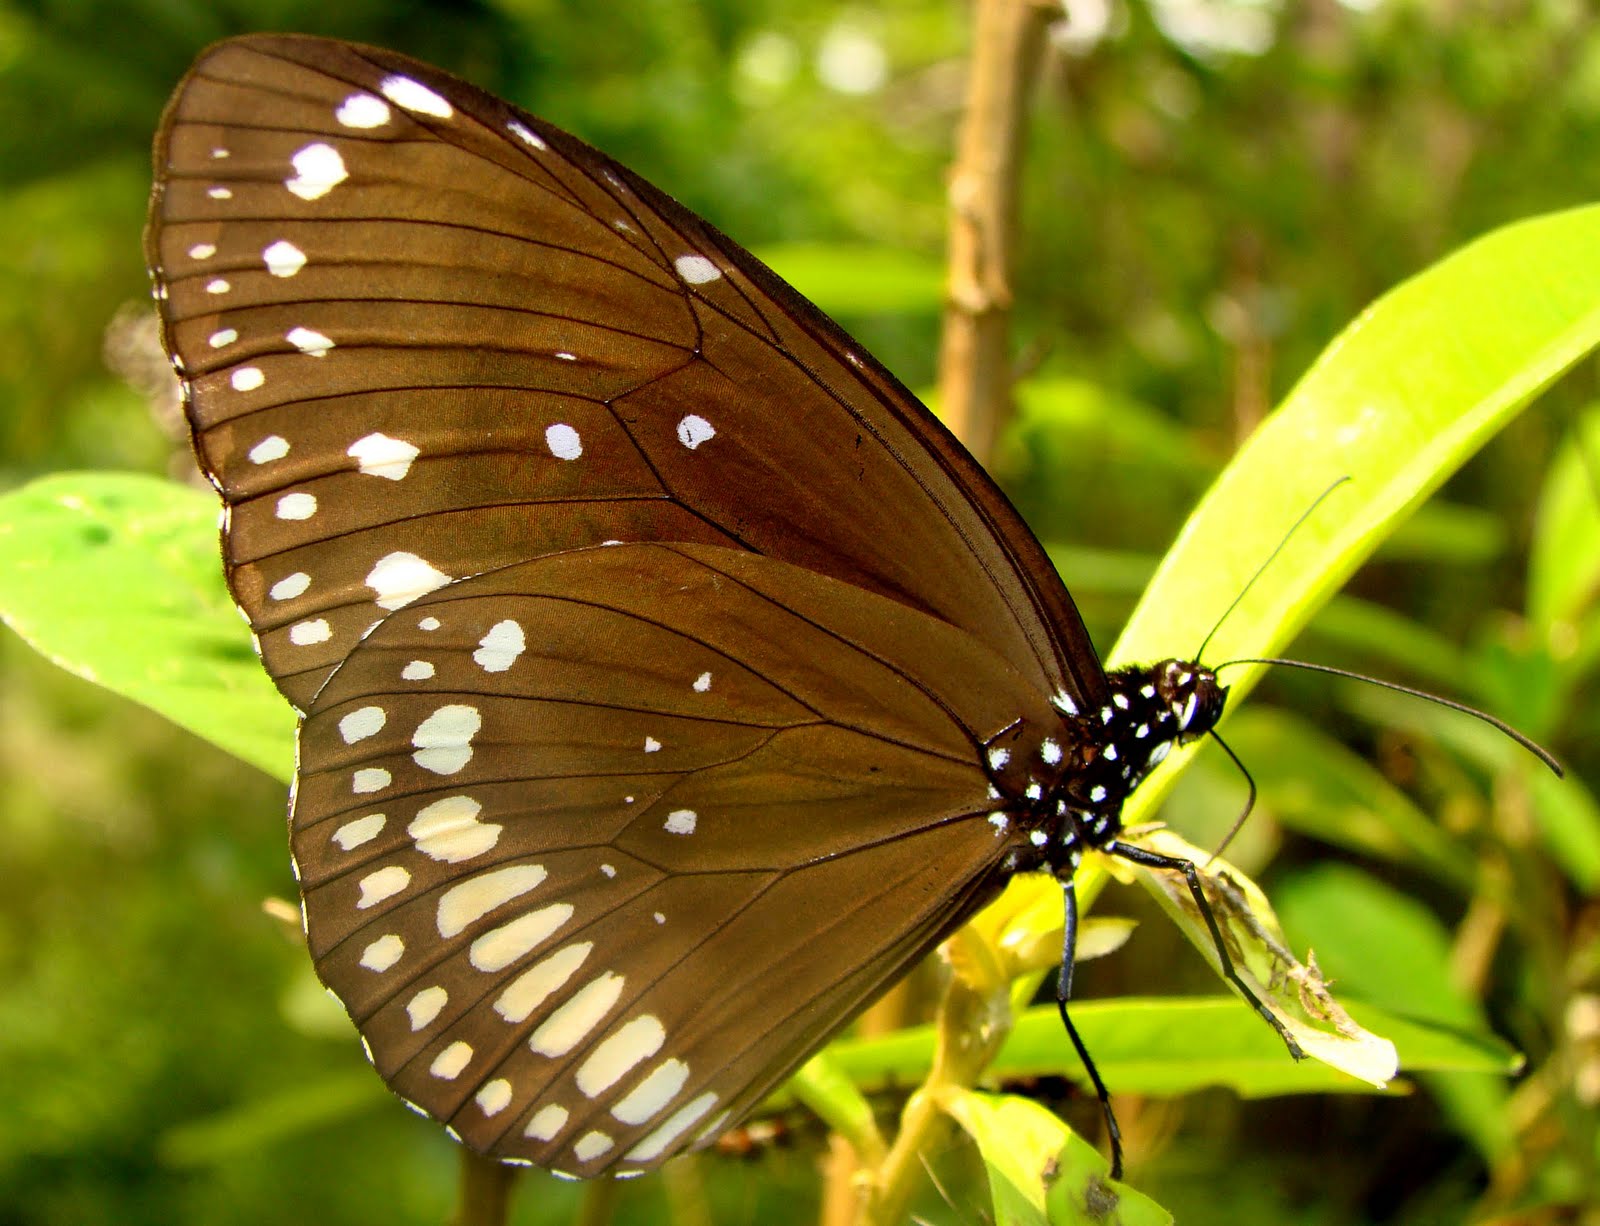 Insects of Kerala: COMMON INDIAN CROW BUTTERFLY- Euploea core